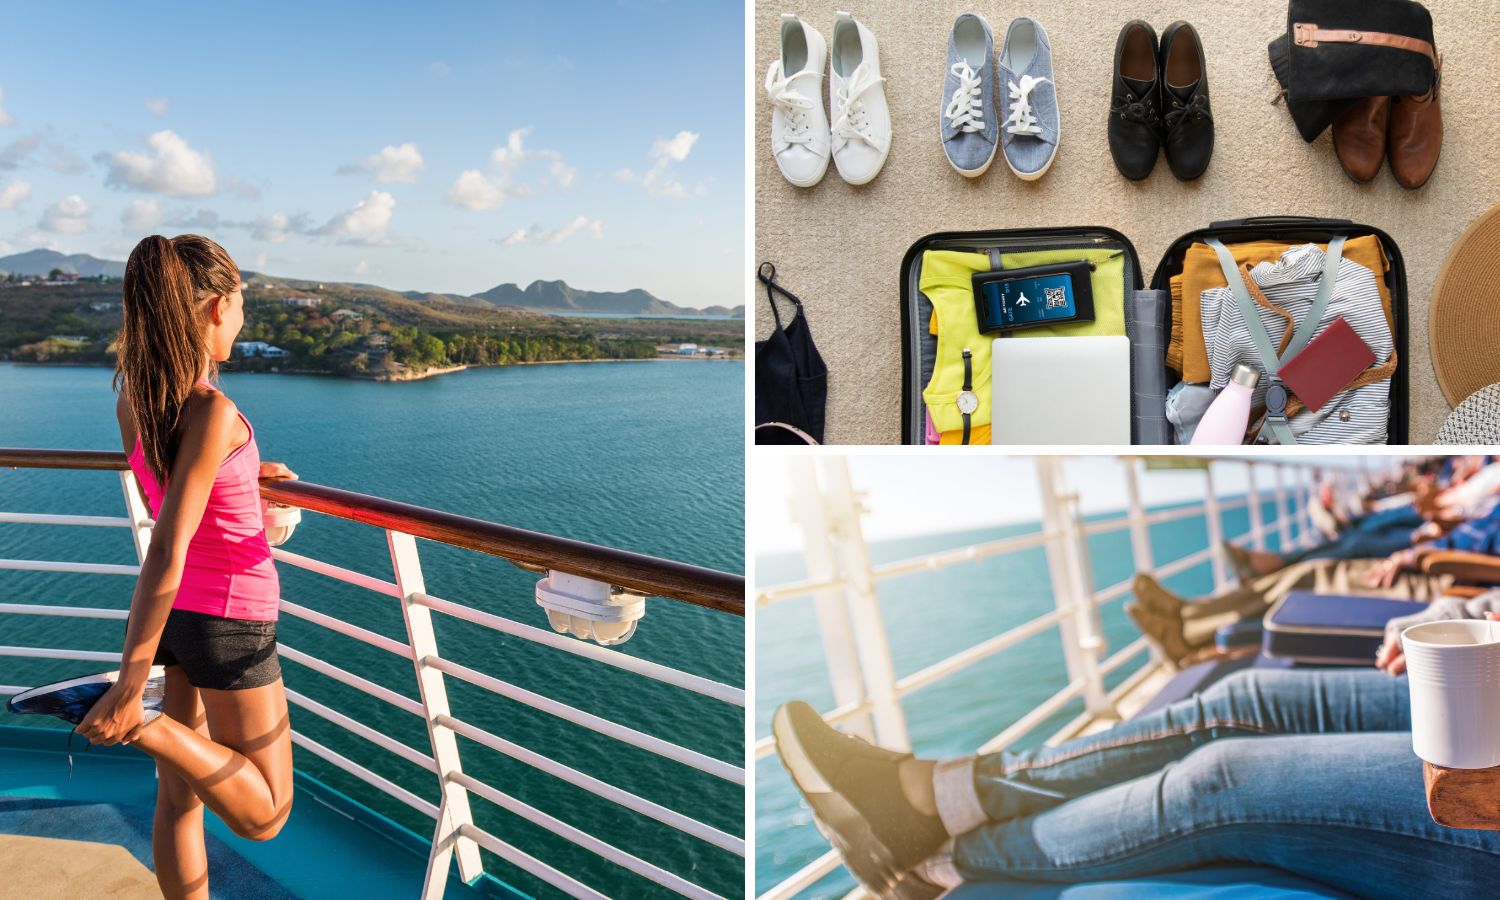 Woman on cruise ship in fitness shoes and suitcase with shoes packed for a cruise